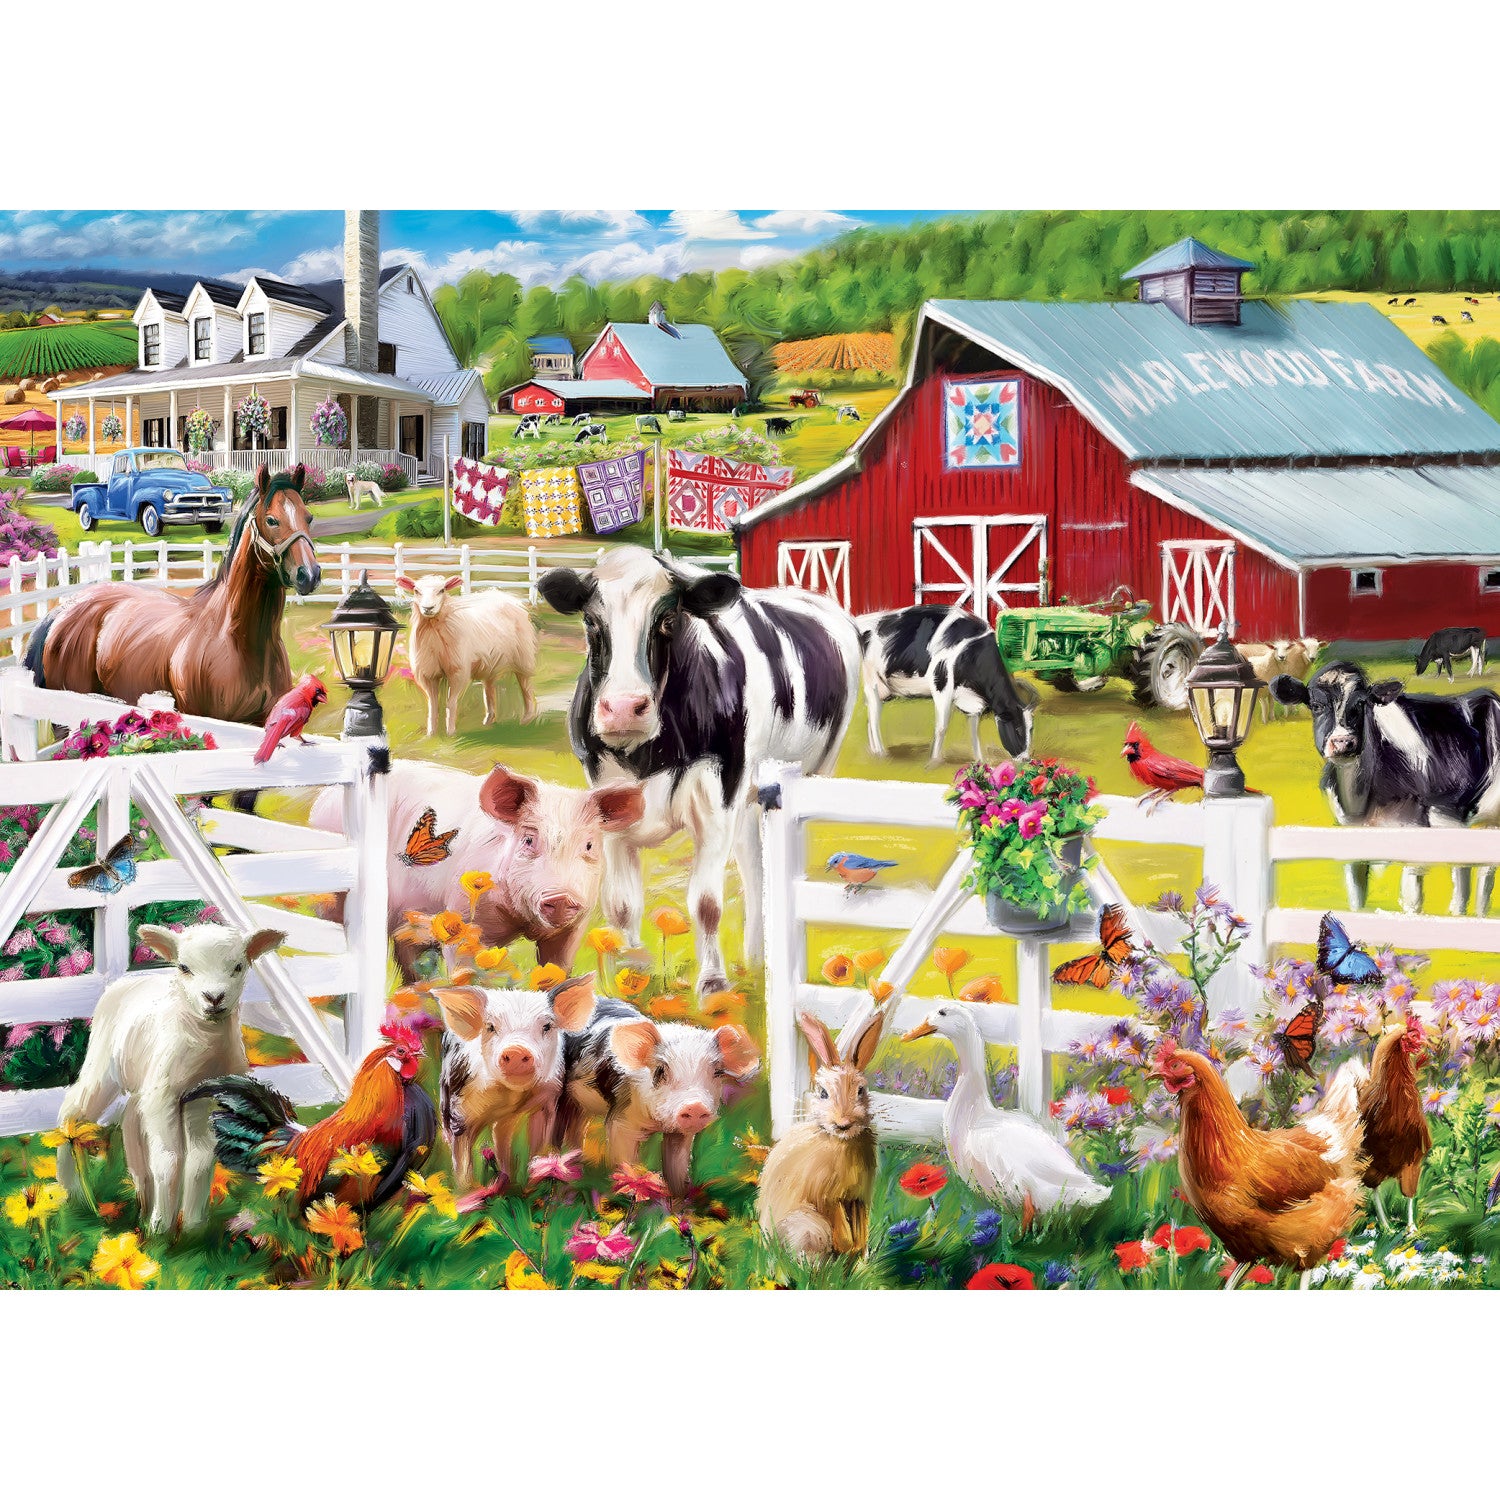 Farm & Country - Weekends On the Farm 1000 Piece Puzzle